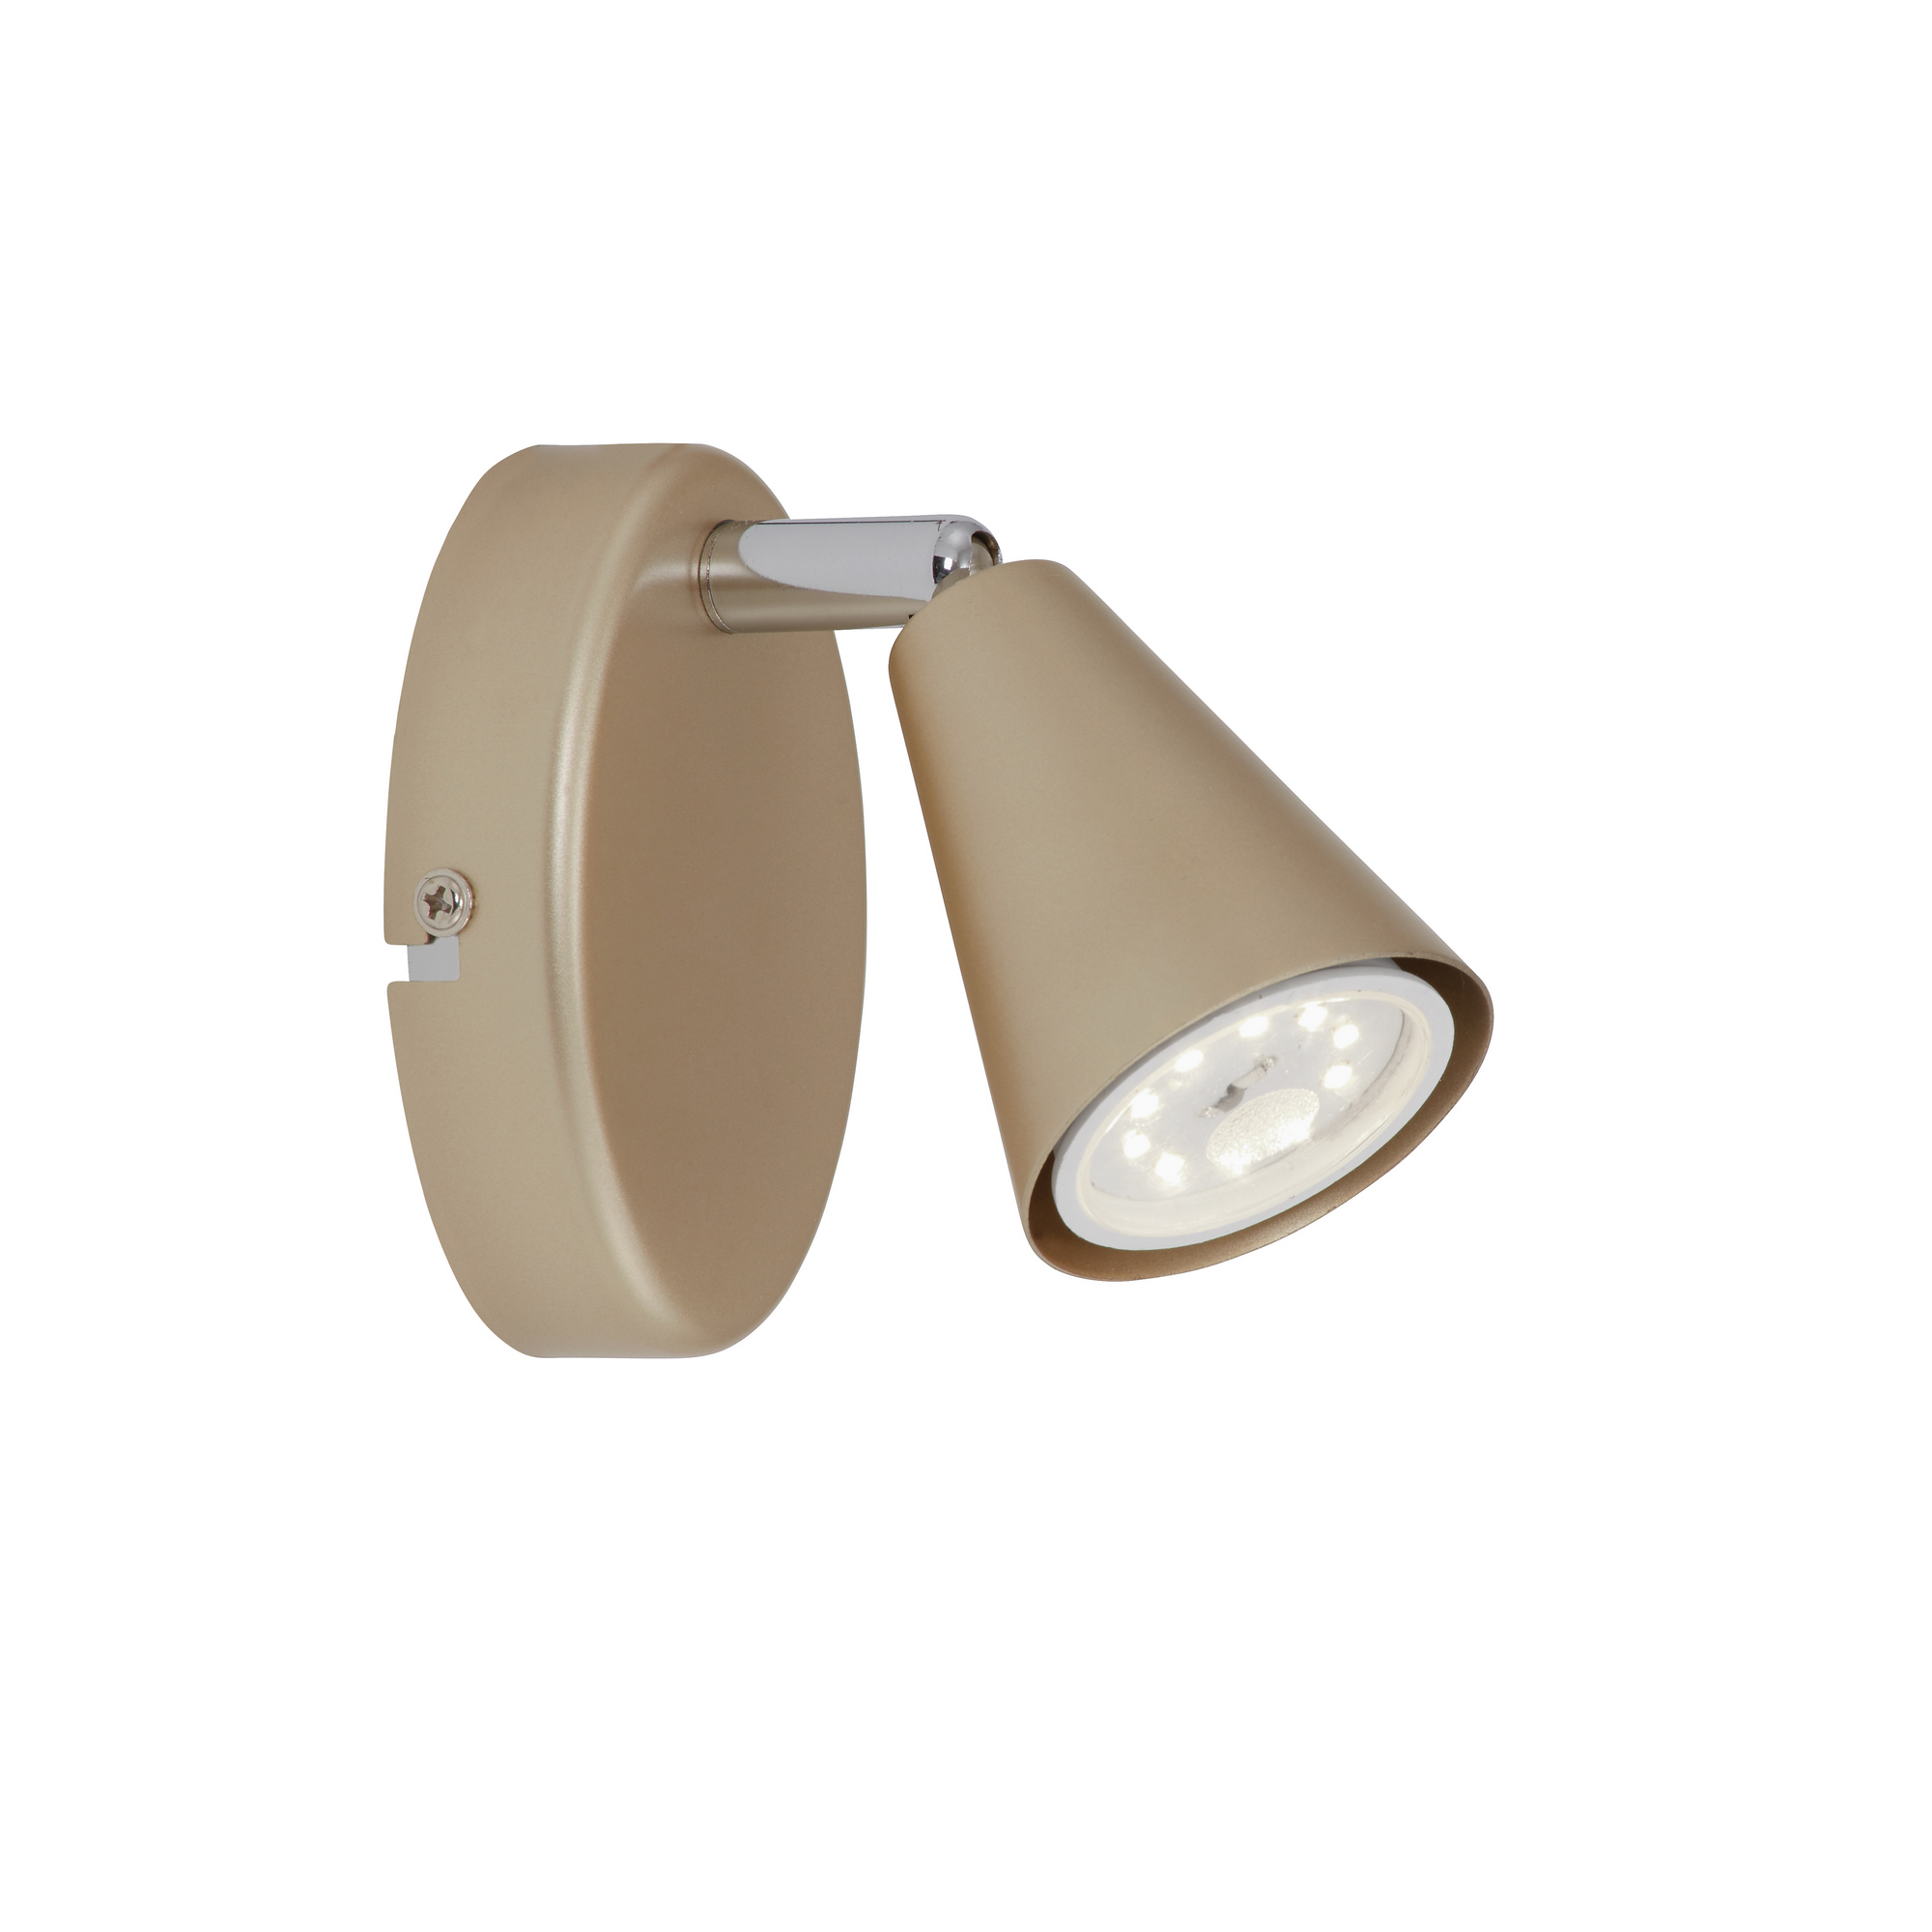 LED-Wohnraumstrahler 'Smart Gold Basic' 1-flammig 400 lm gold + product picture